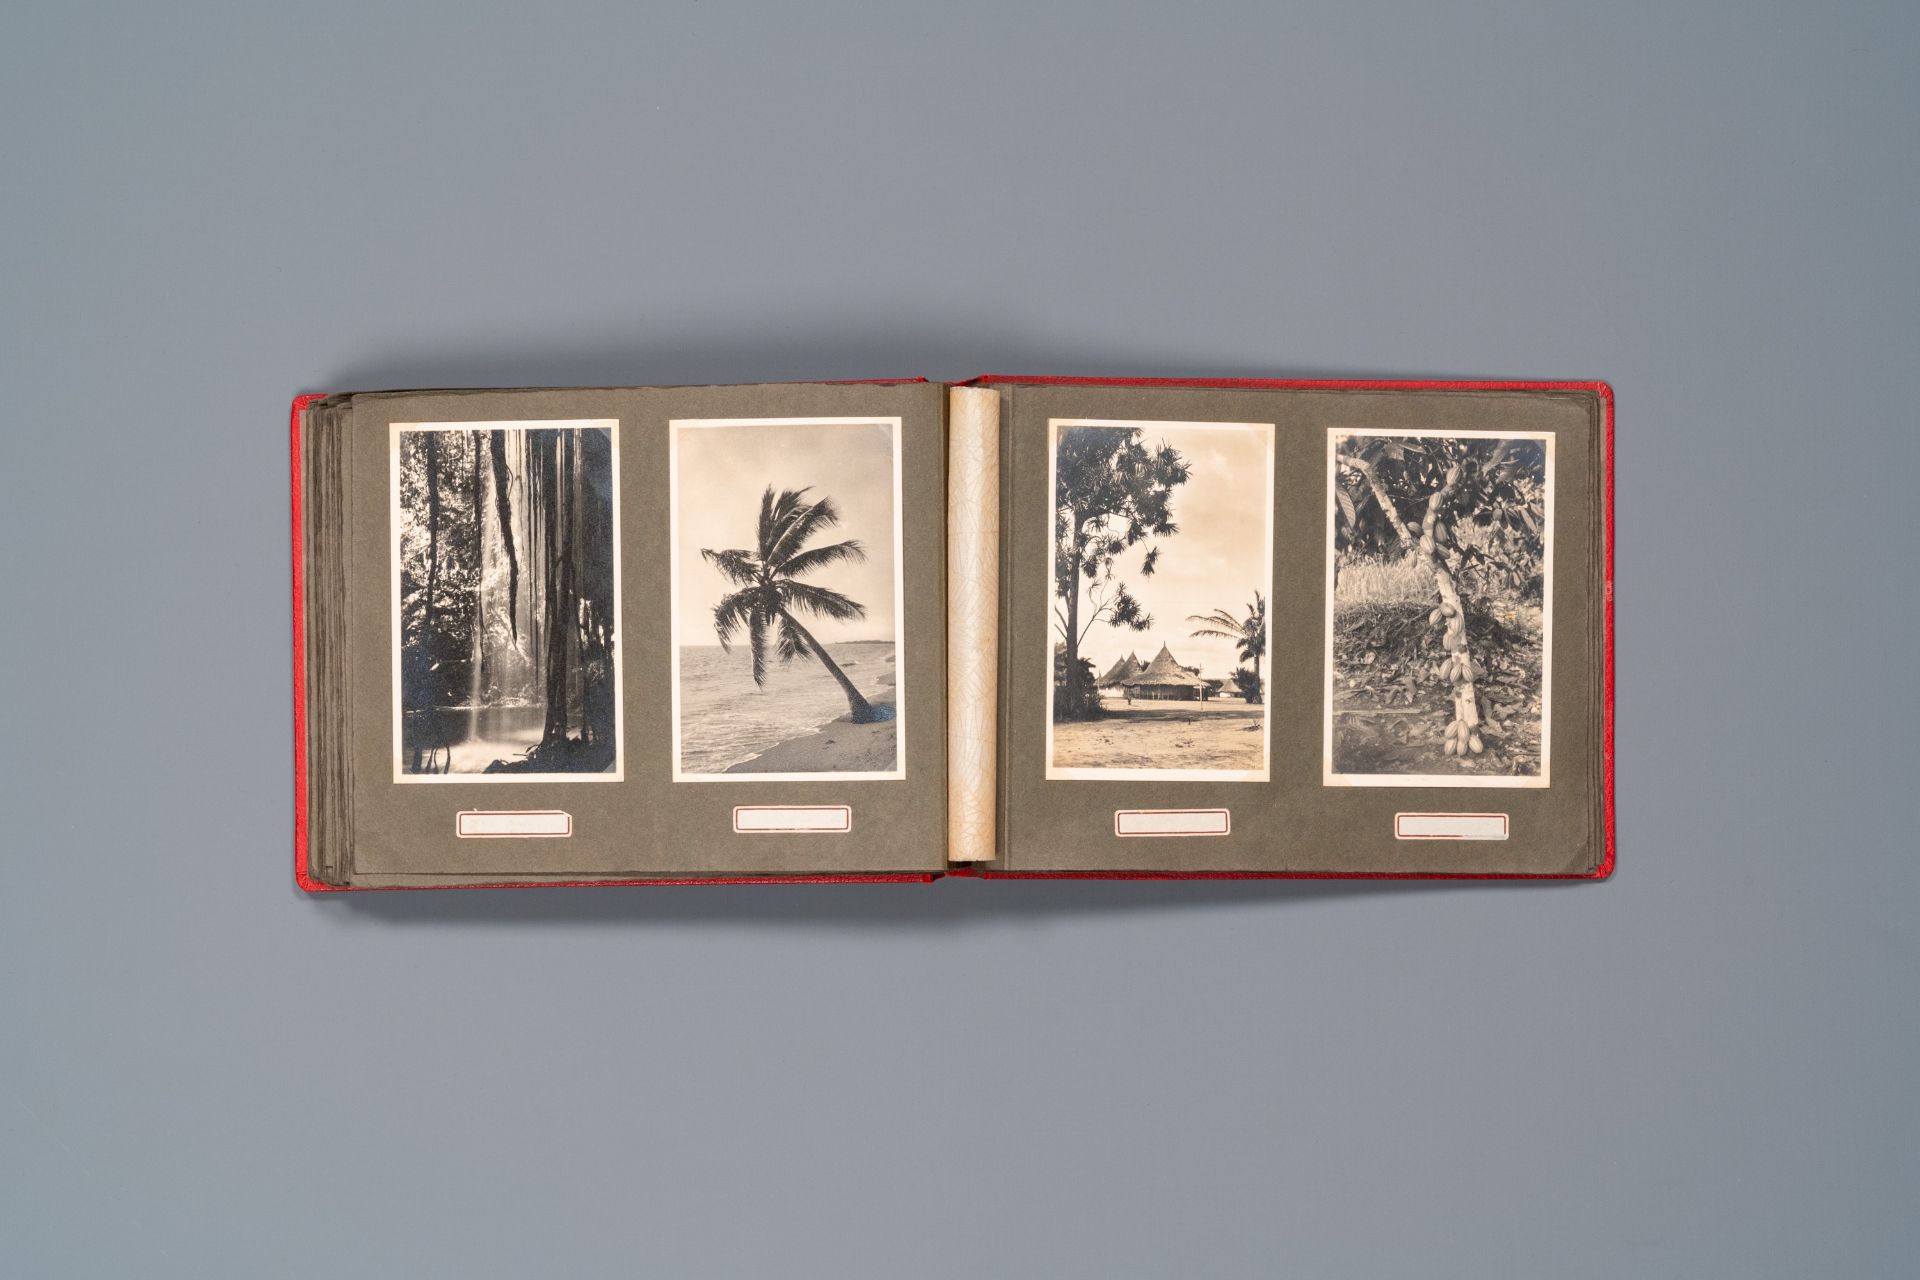 Casimir Zagourski (1883-1944): Album with 90 black and white photographs from the series 'L'Afrique - Image 20 of 26